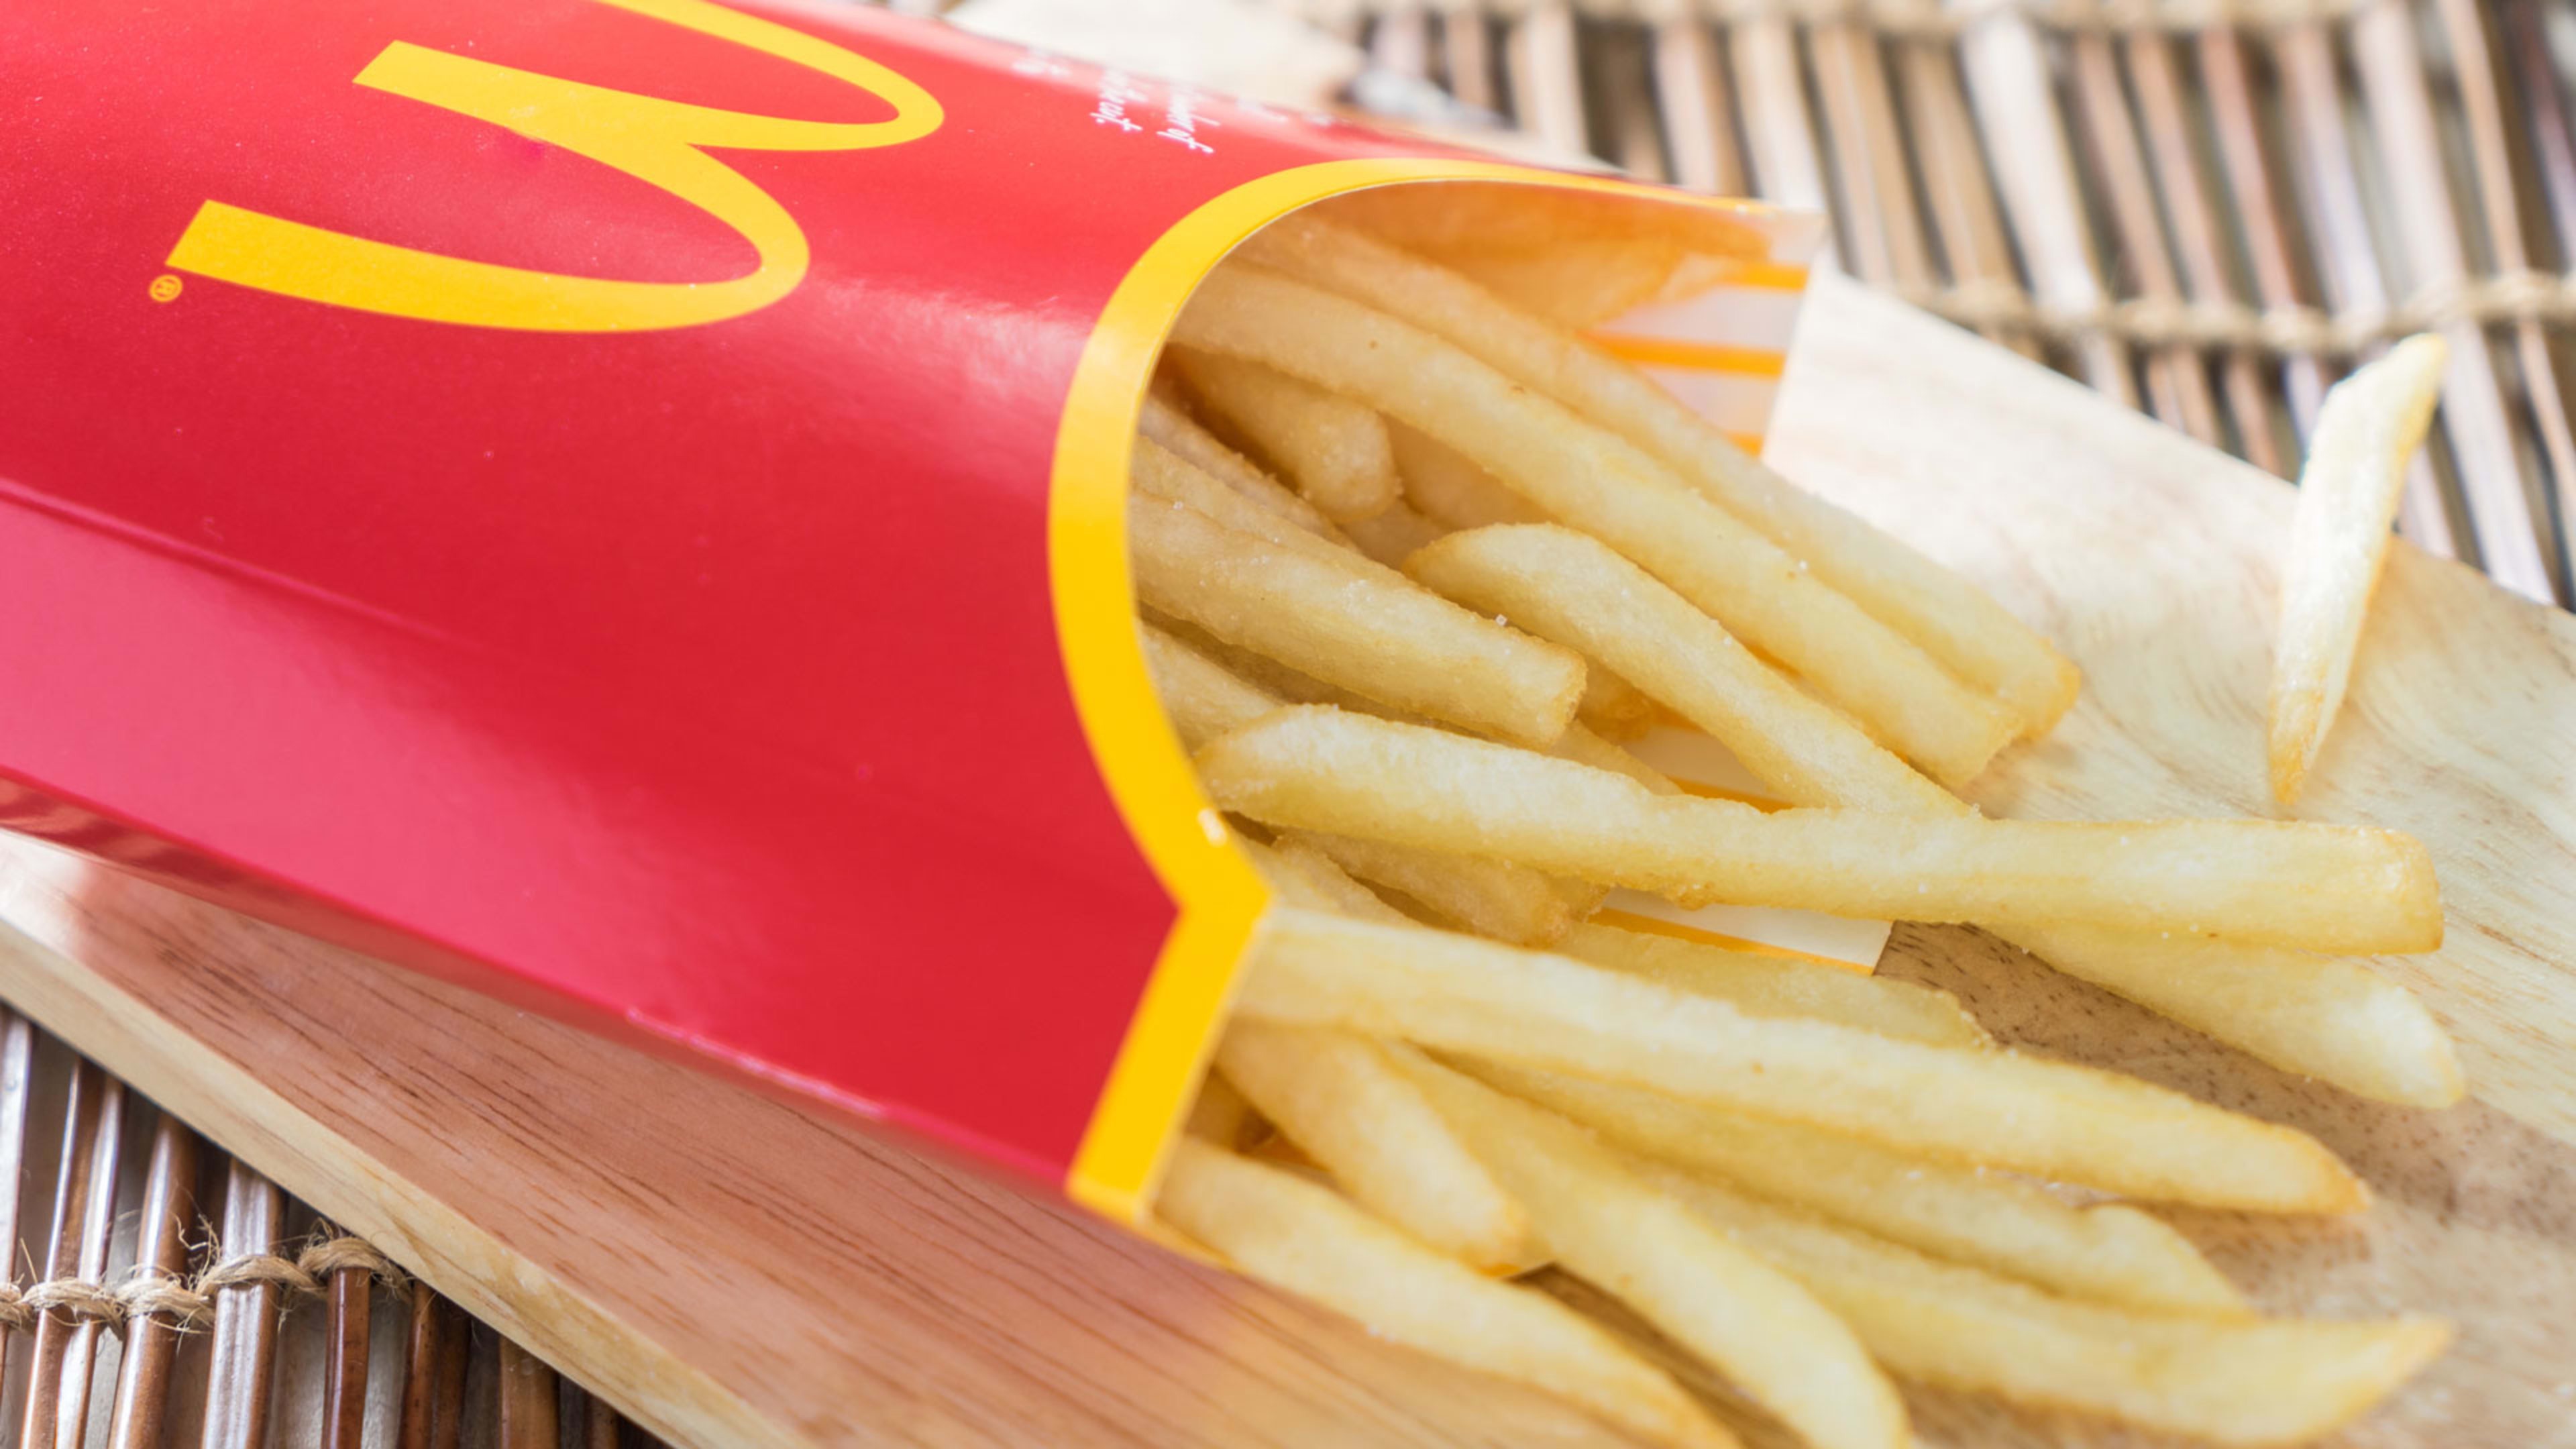 A chemical found in McDonald’s french fries may lead to a baldness cure